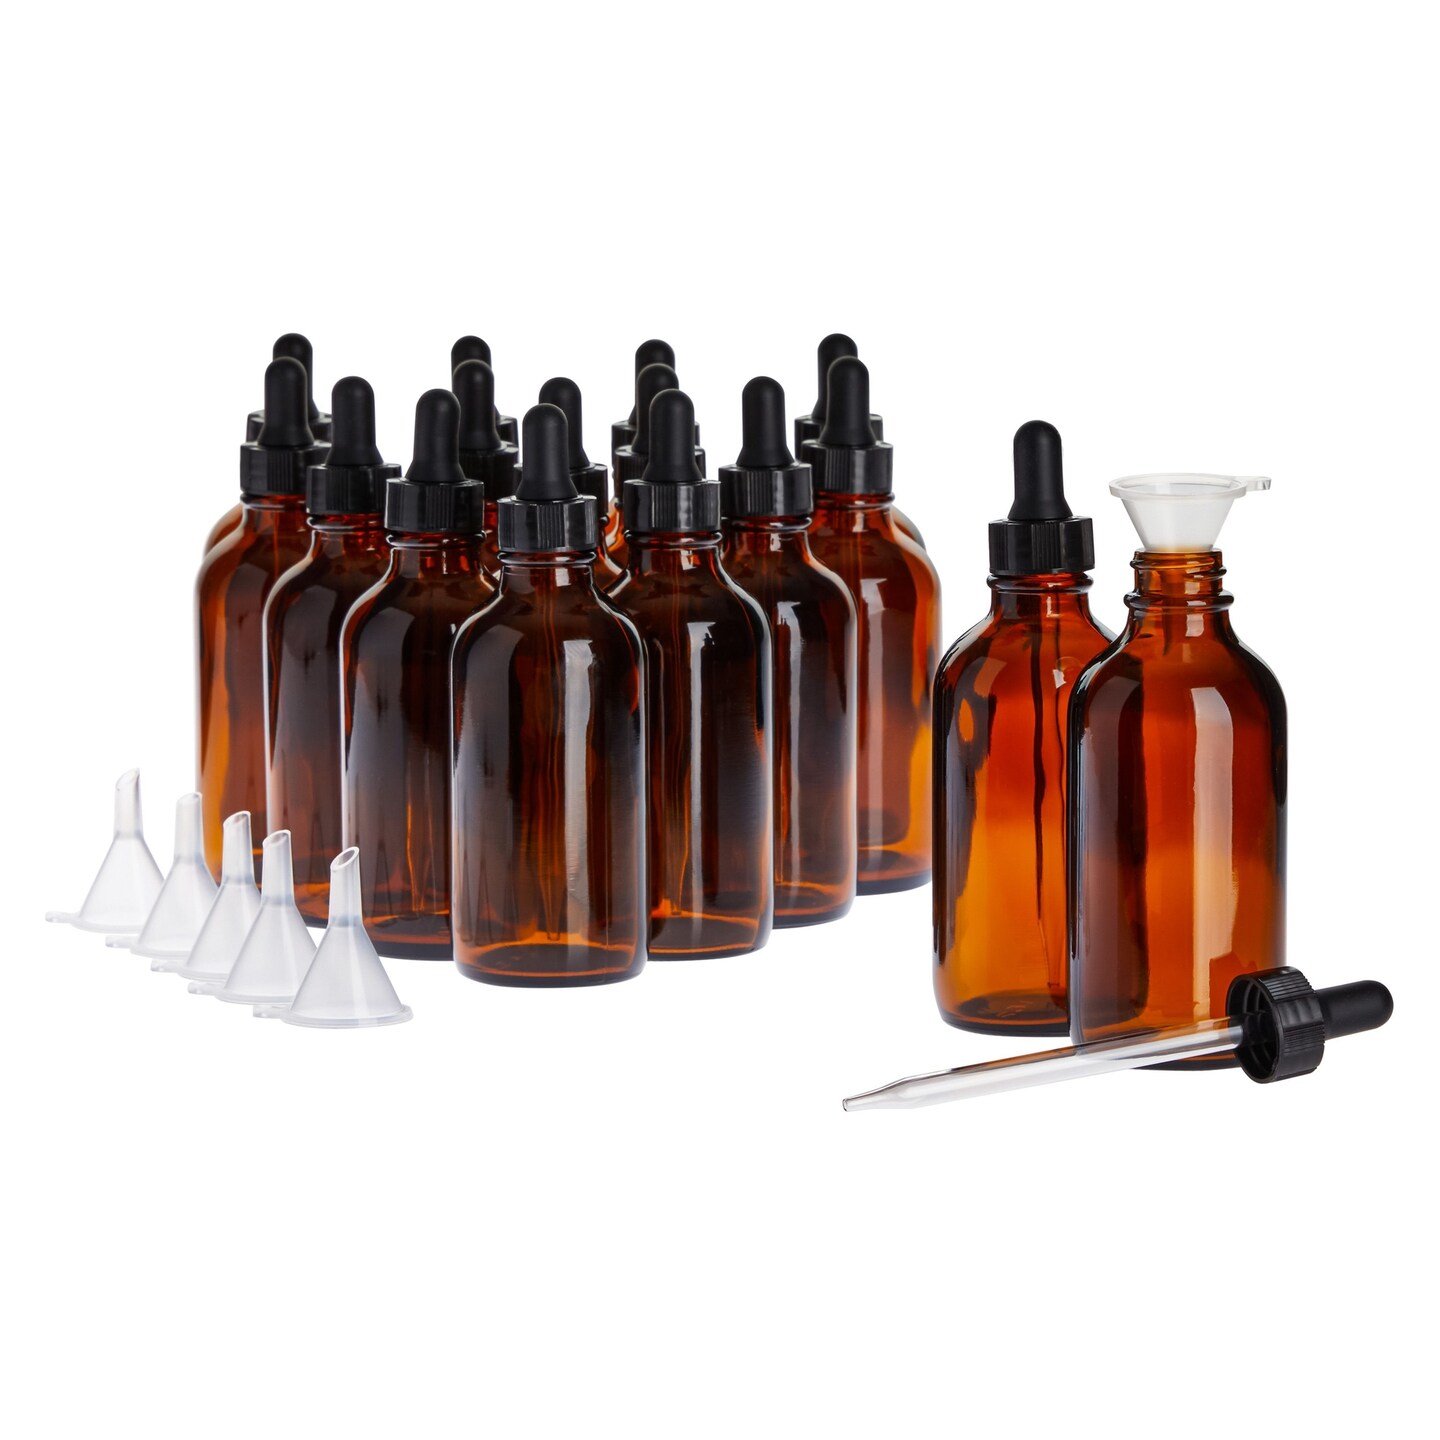 15 Pack of 4oz Amber Glass Bottles with Dropper Dispenser and 6 Funnels for  Essential Oils, Travel, Perfumes, Liquids, Hair and Body Oils (21 Total